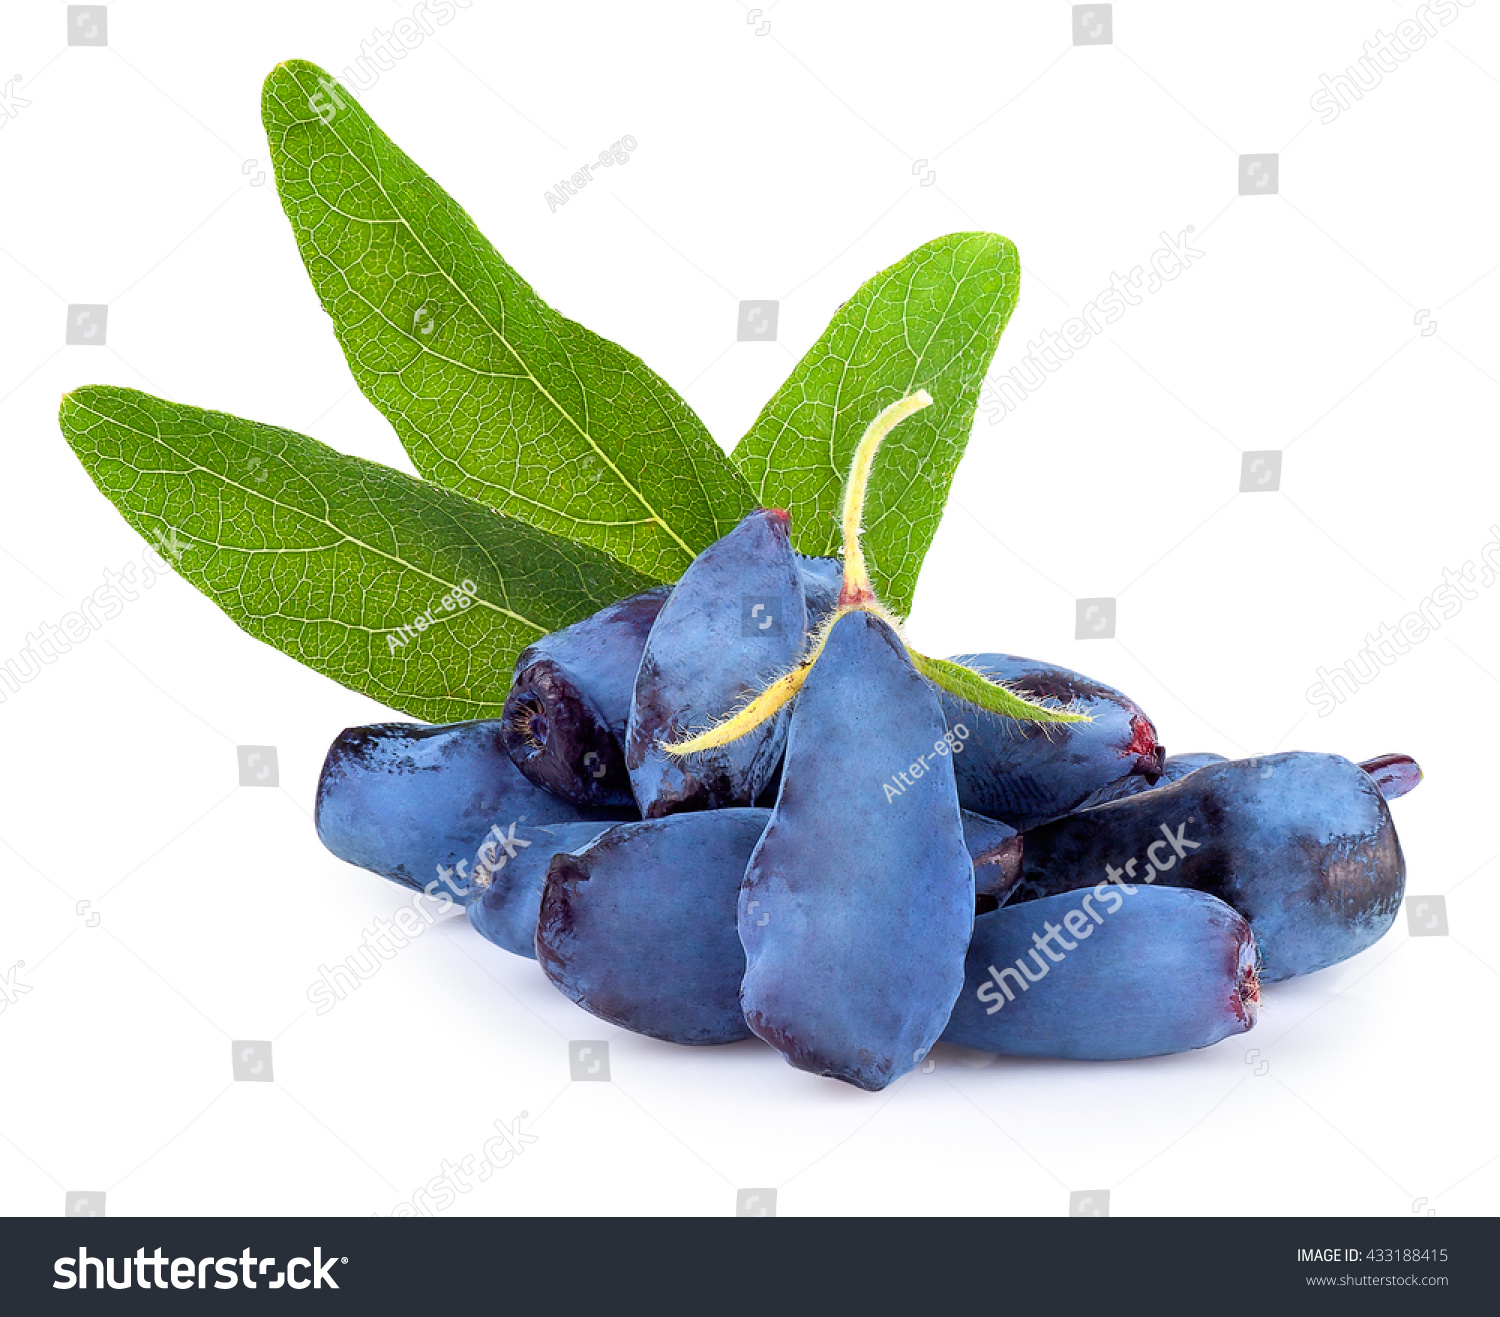 Fresh honeysuckle blue berry fruits with leaf isolated on white background #433188415